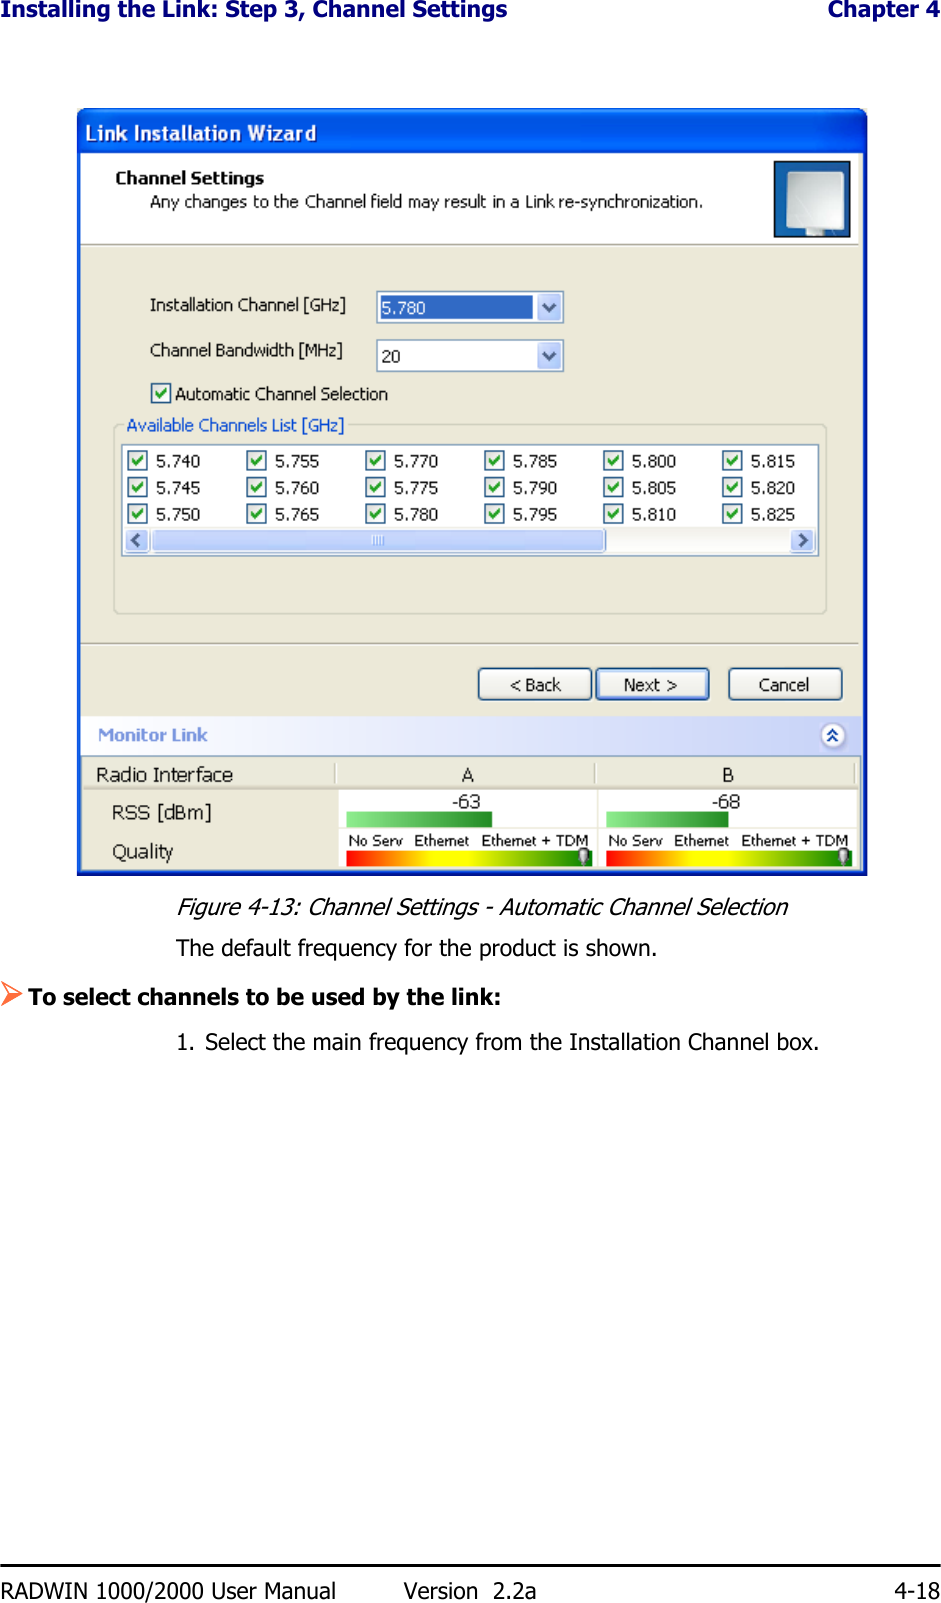 Installing the Link: Step 3, Channel Settings  Chapter 4RADWIN 1000/2000 User Manual Version  2.2a 4-18Figure 4-13: Channel Settings - Automatic Channel SelectionThe default frequency for the product is shown.¾To select channels to be used by the link:1. Select the main frequency from the Installation Channel box.